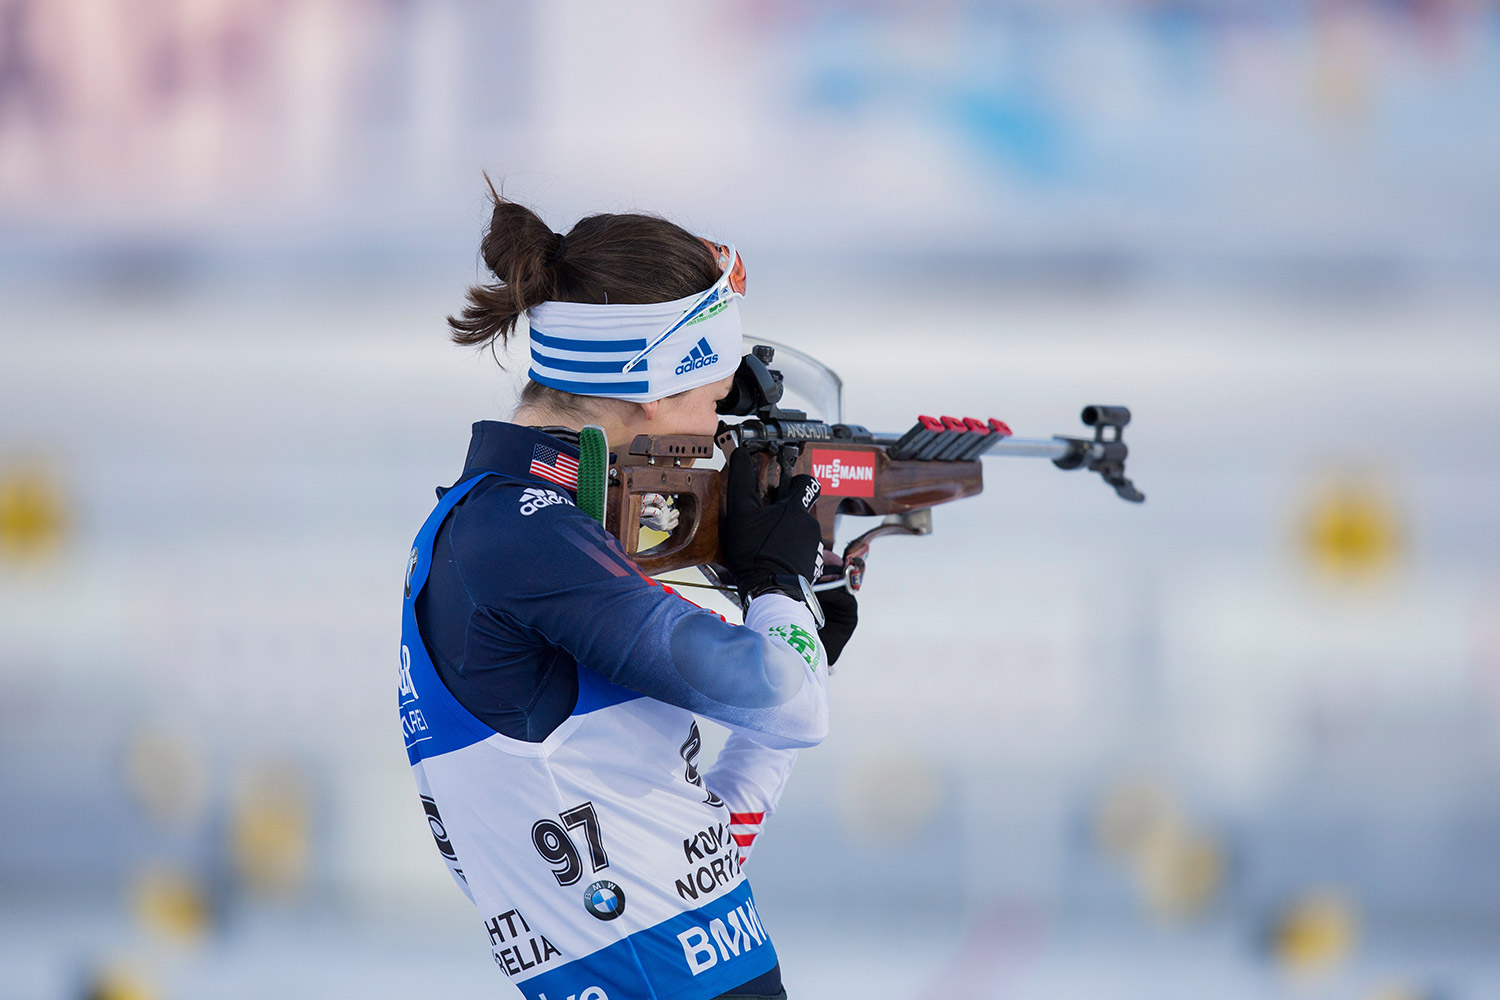 Clare Egan will be competing for the third time at the Nordic Heritage Center in Presque Isle, but first time with a rifle strapped to her back. NordicFocus